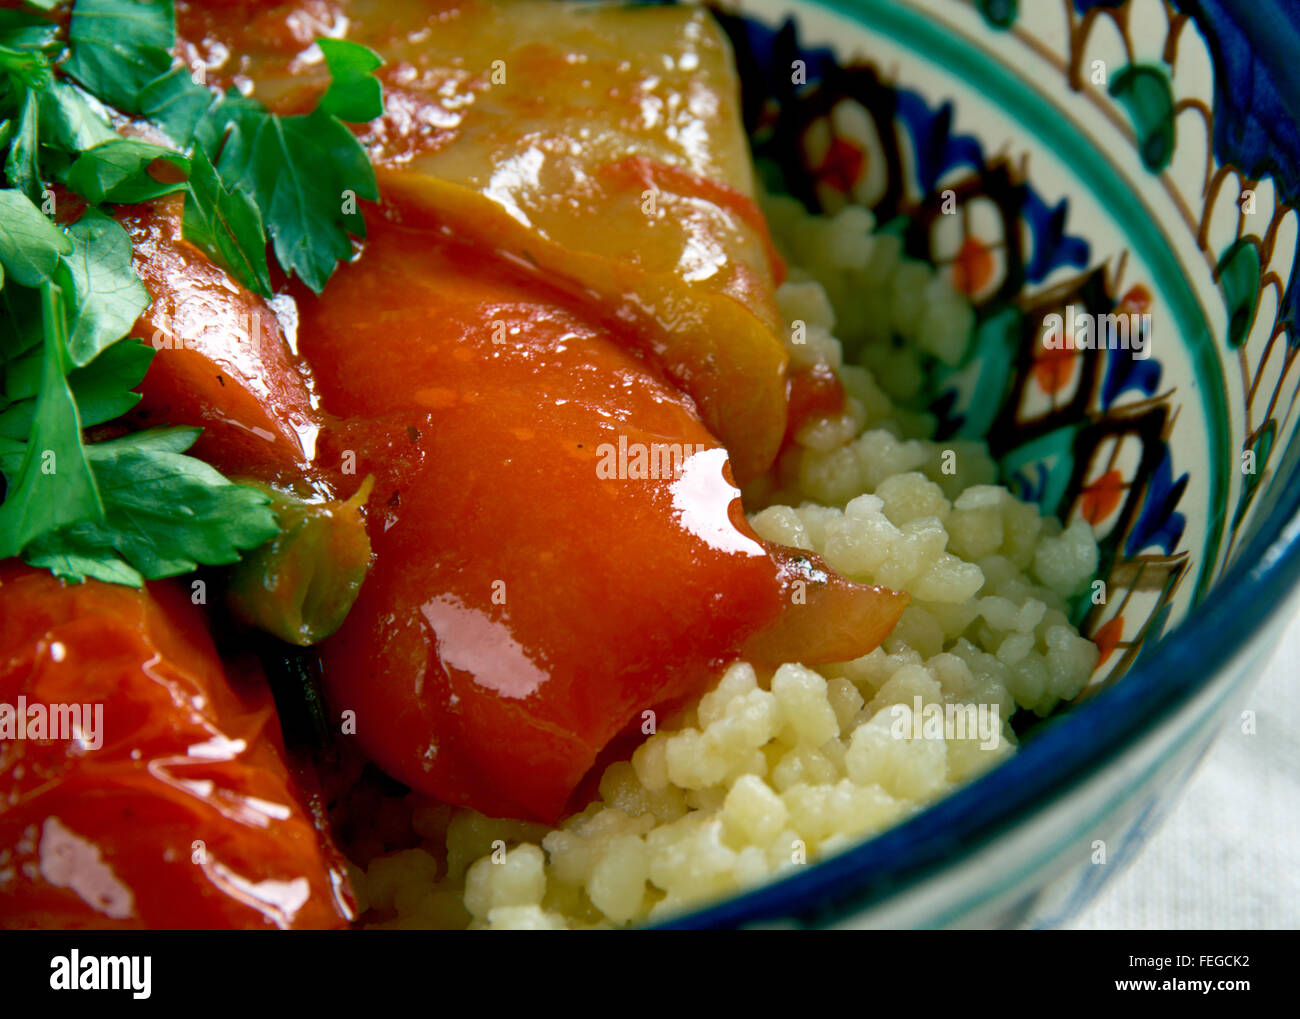 Mediterranean Vegetables CousCous. Maghreb dish Stock Photo